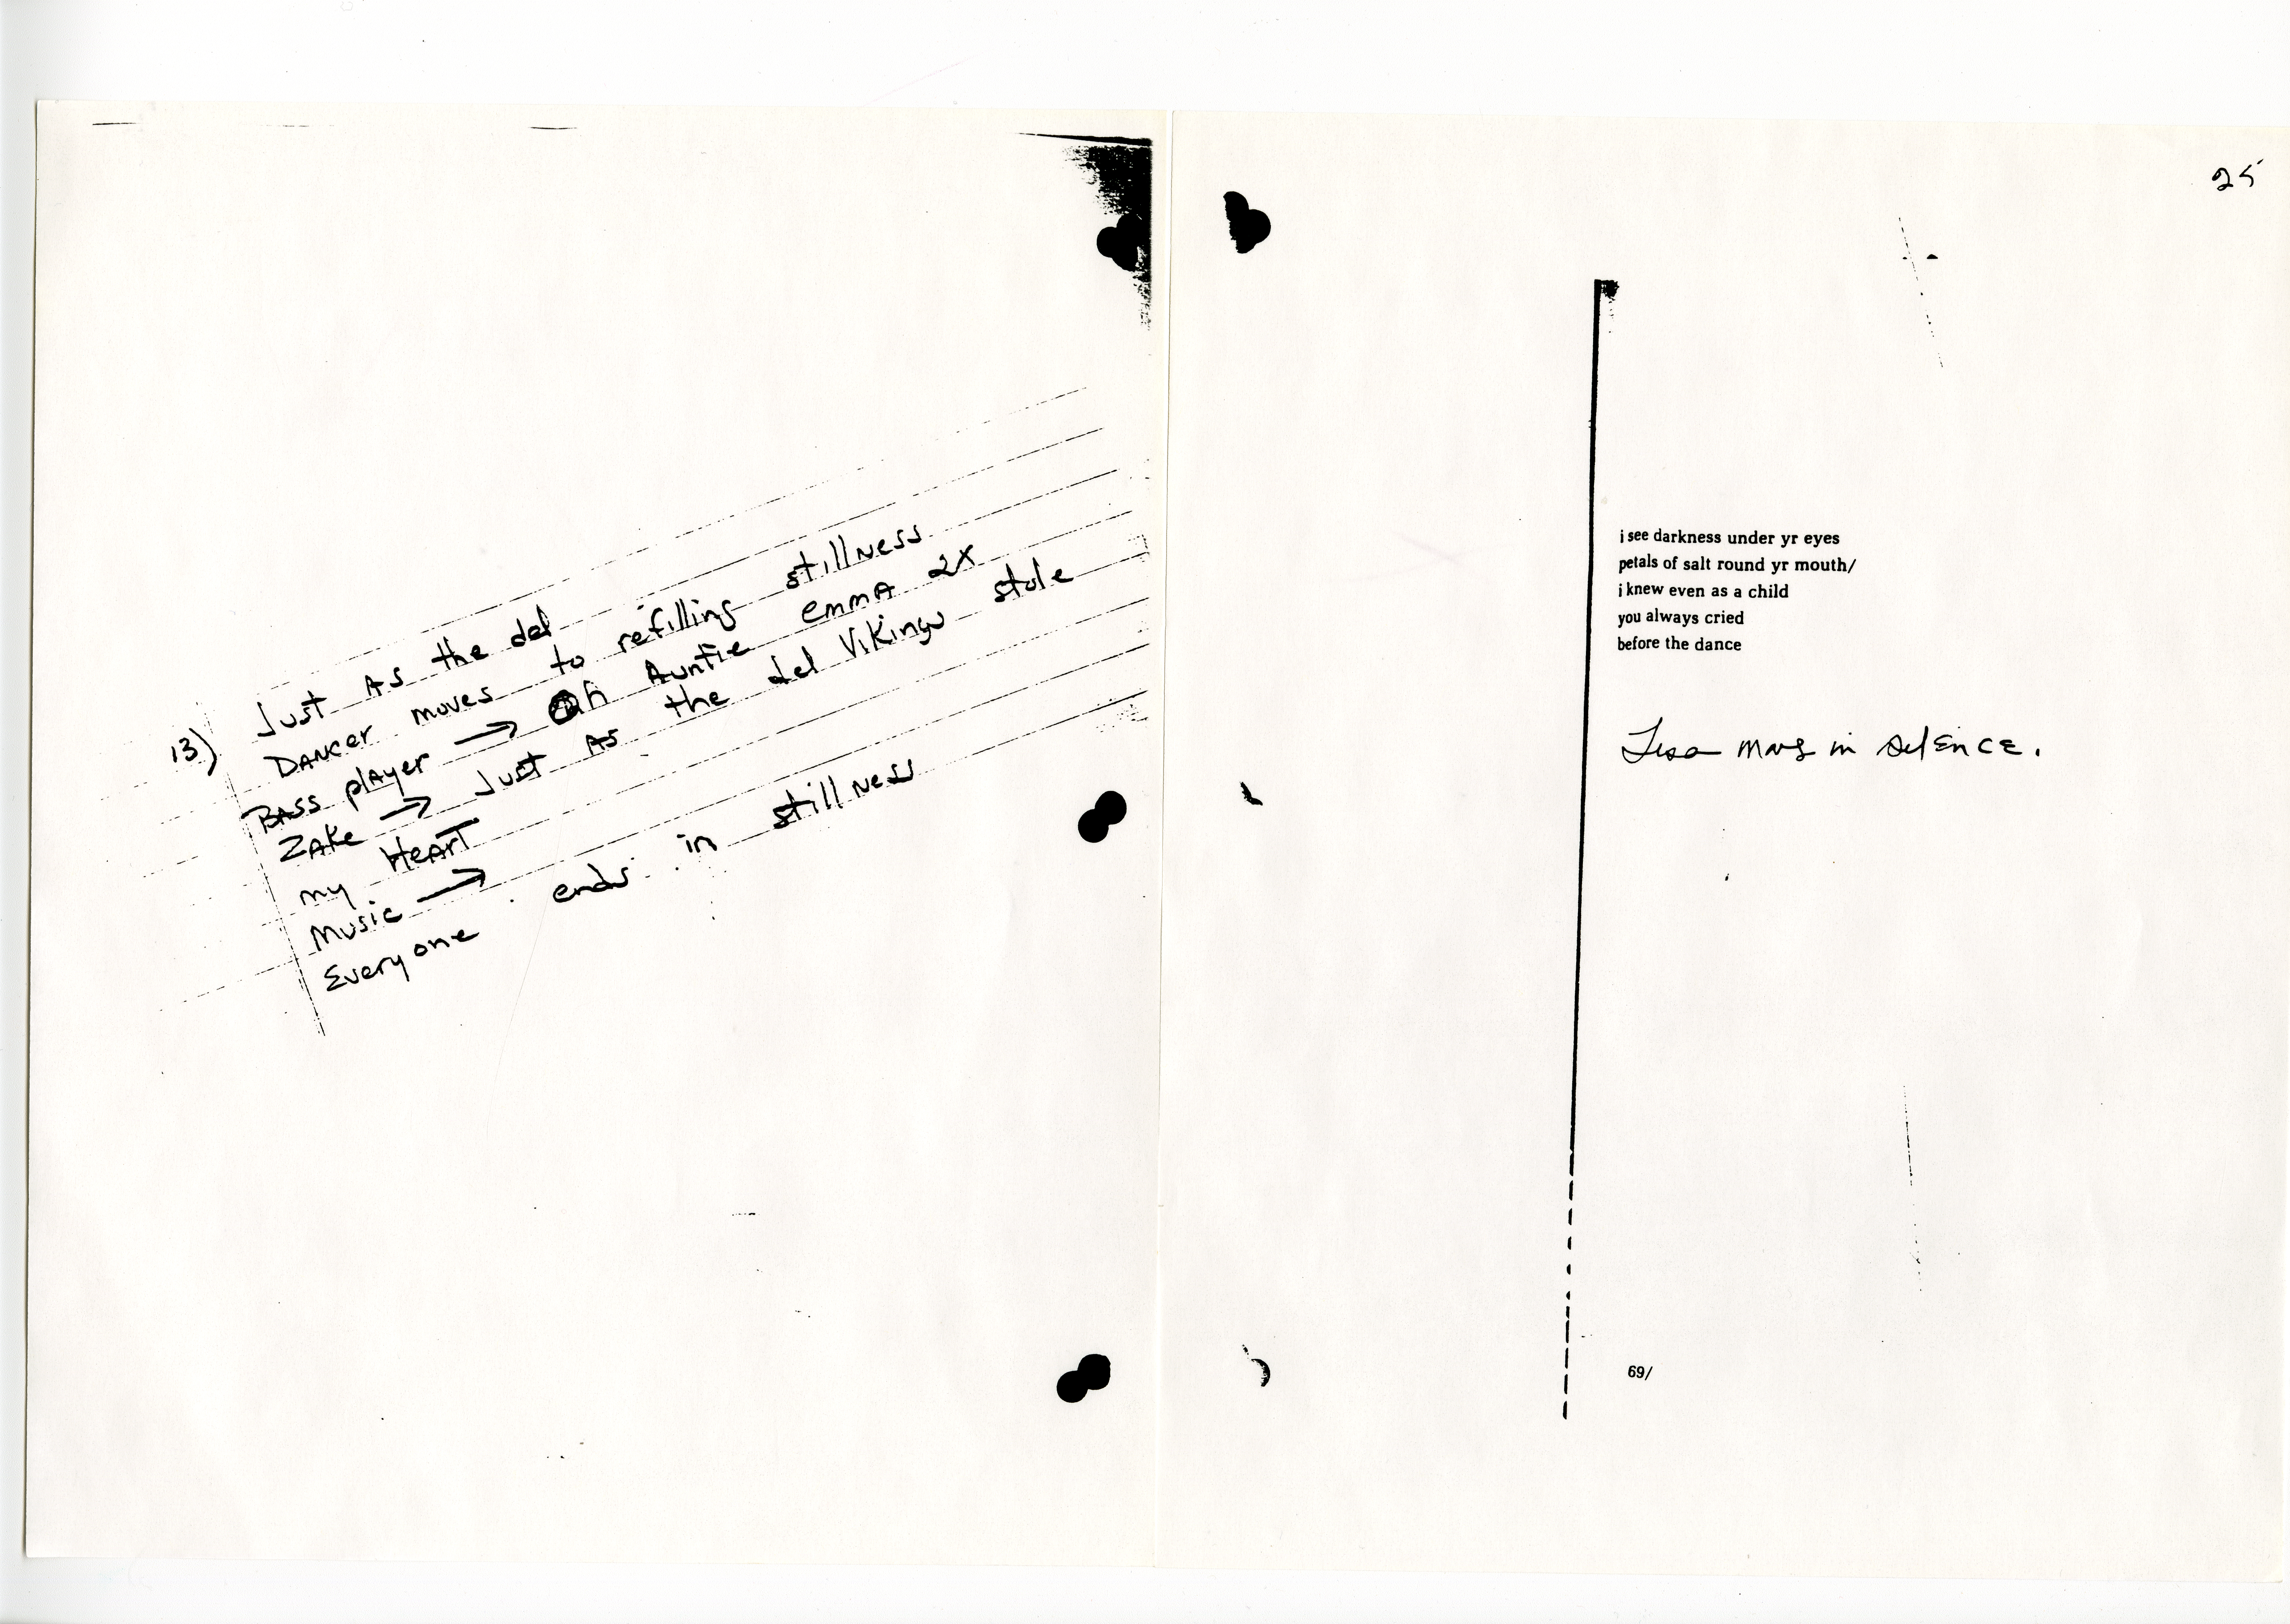 Scan of materials from Ntozake Shange's papers by Kiani Ned.